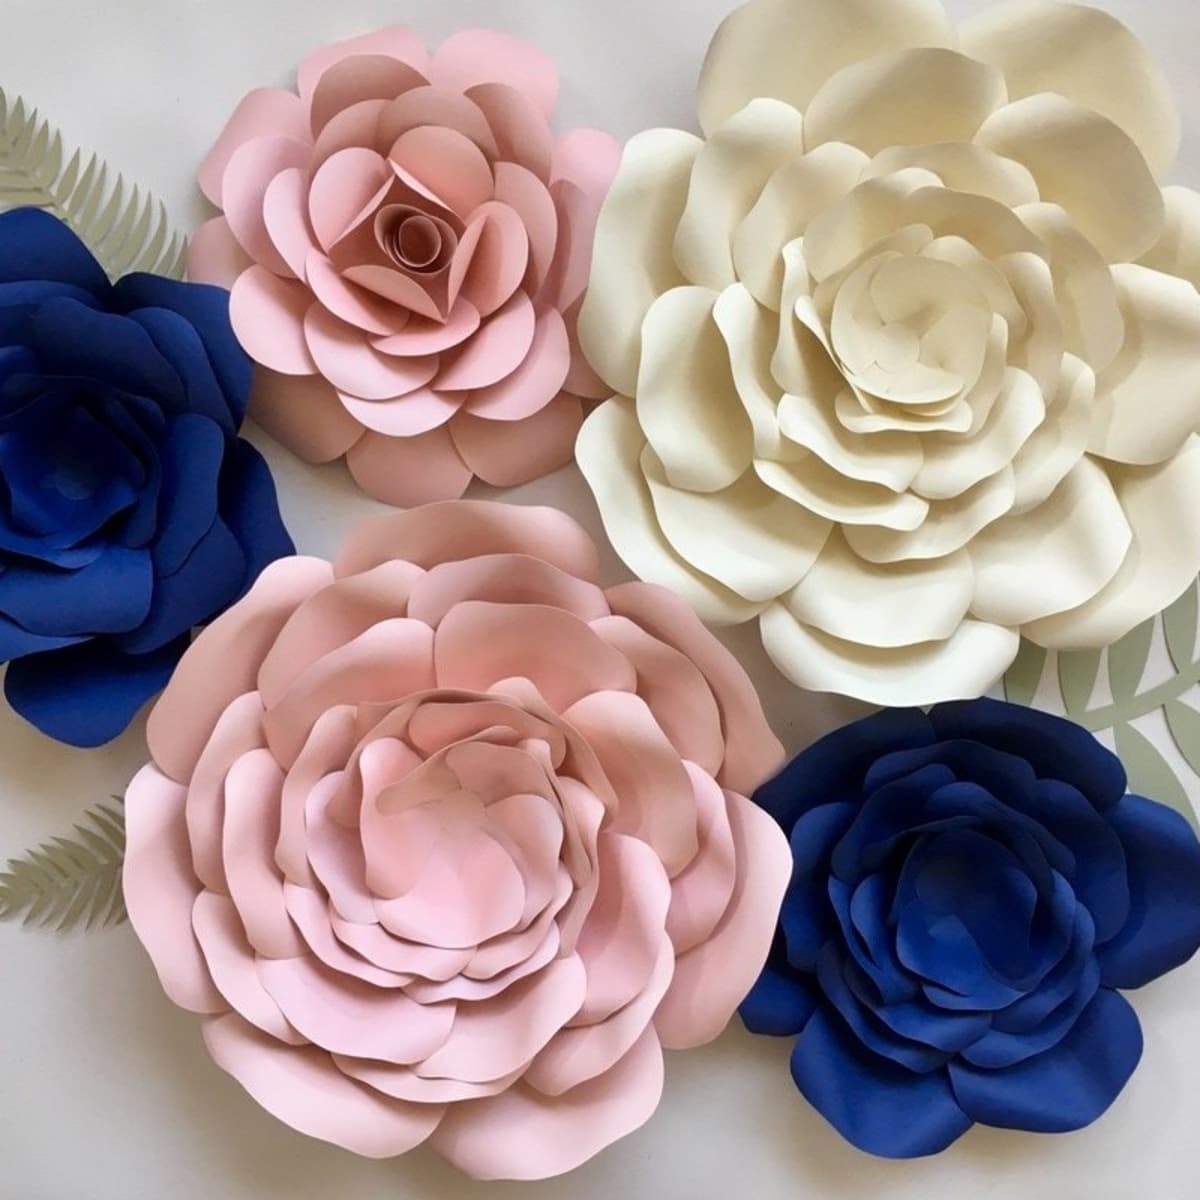 Paper Roses - An Easy Craft Tutorial for Spring with Beautiful Results!